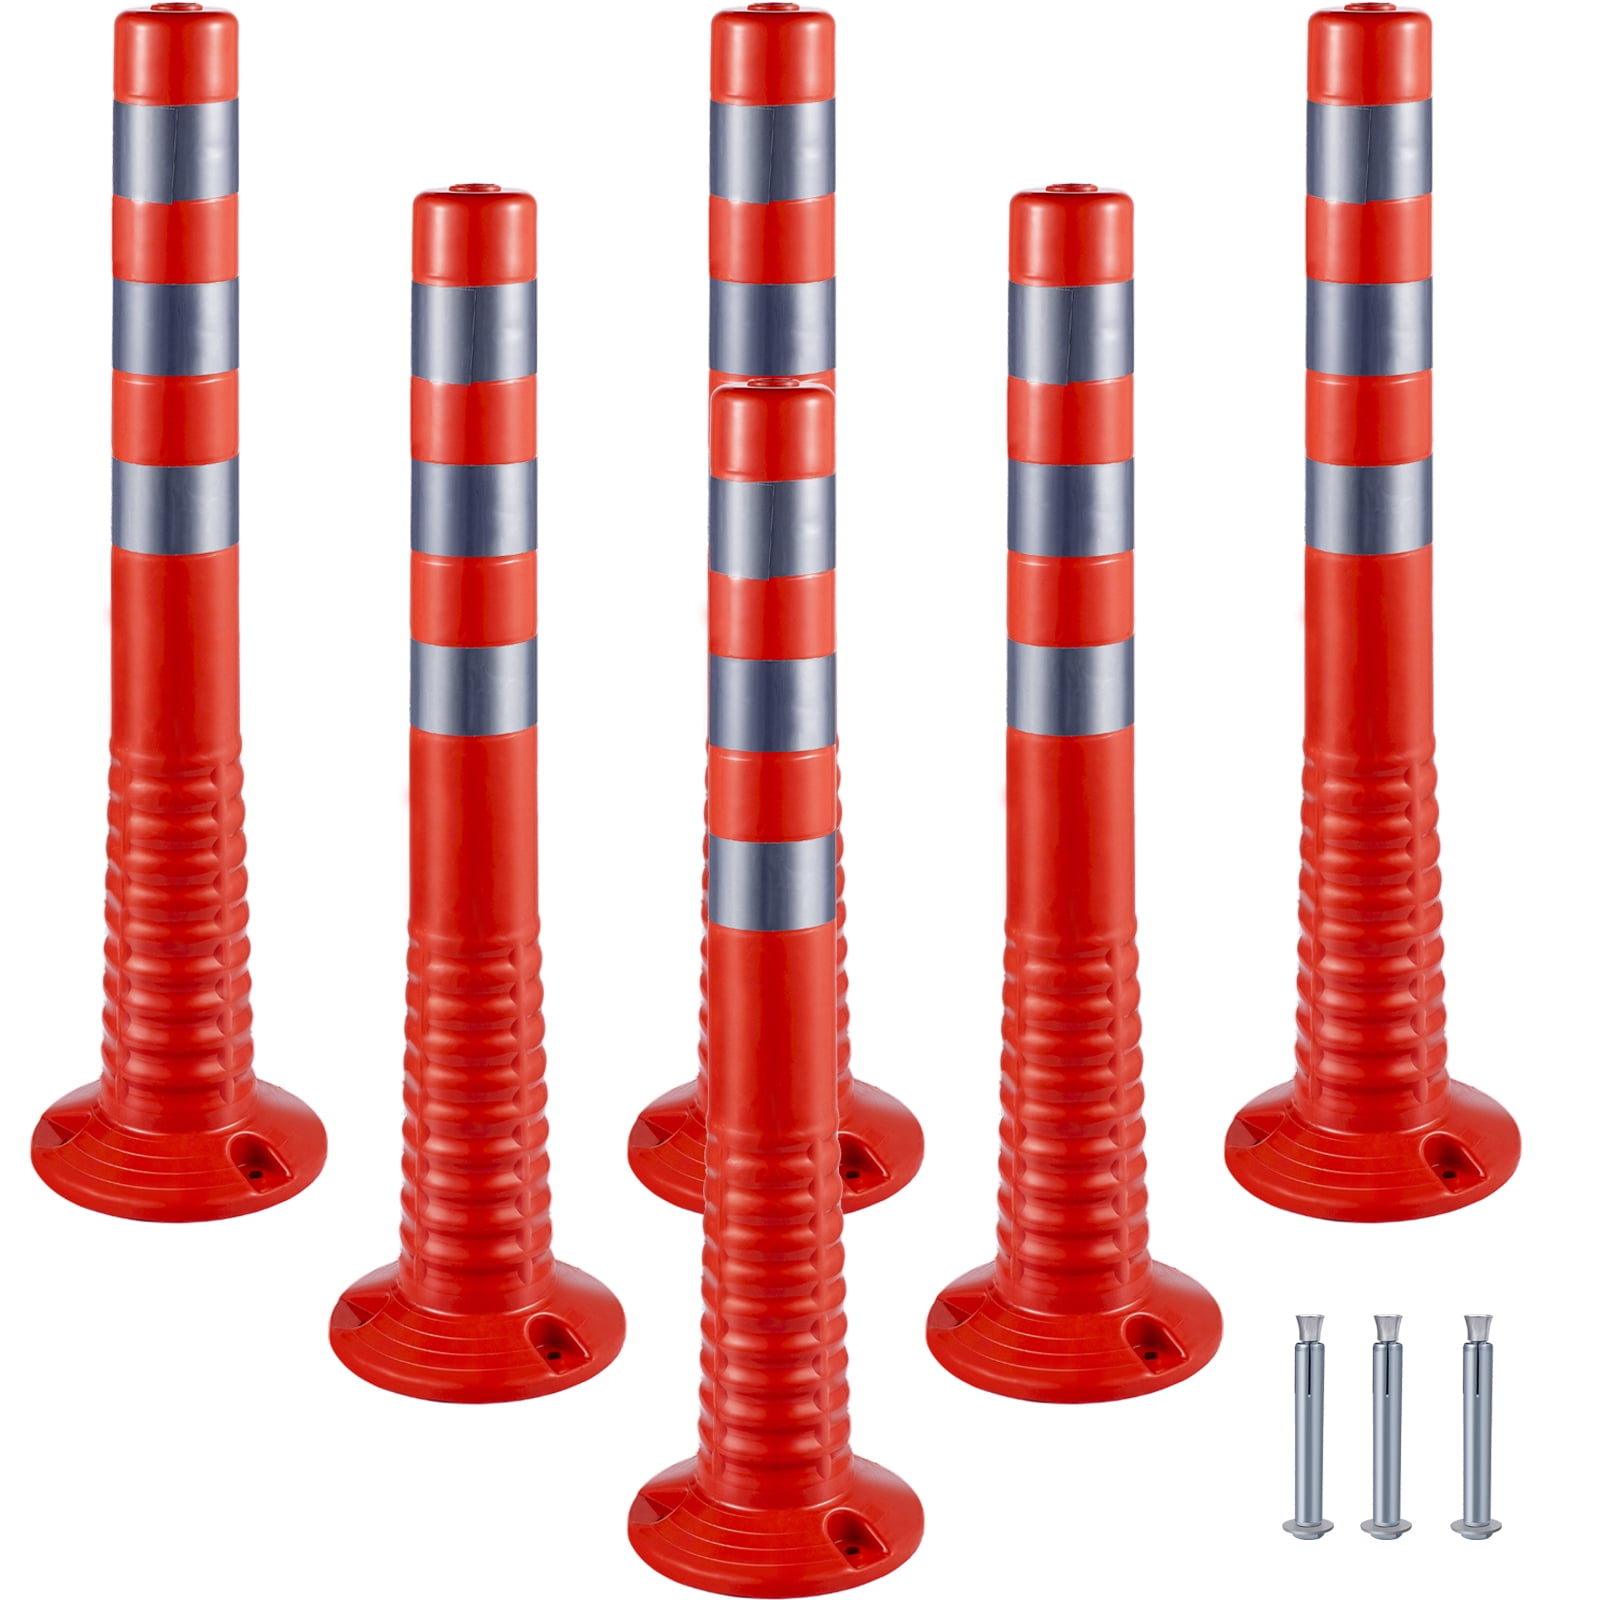 VEVORbrand Traffic Delineator, 6pcs Posts Channelizer Cone, Delineator Post  Kit 30 in Height, PU Traffic Post, Safety Cones, Portable Spring Posts  with Base, Barrier Cones with Reflective Bands 